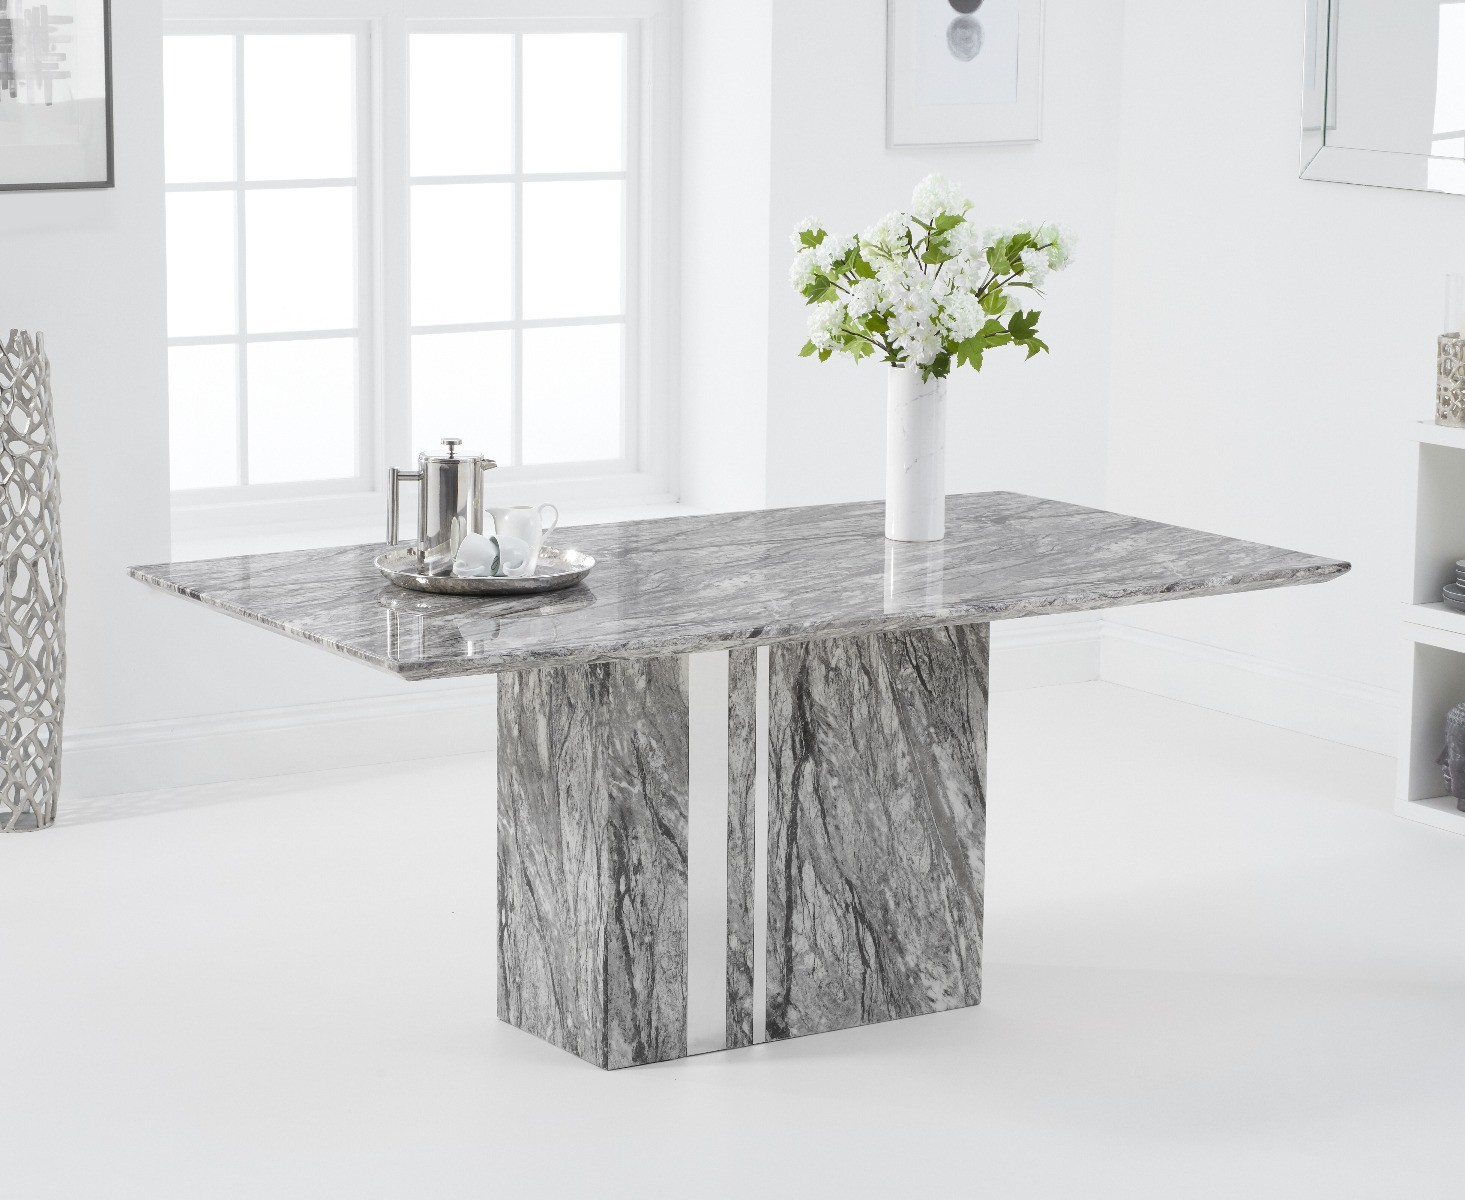 Photo 2 of Alicia 180cm grey marble dining table with 8 grey austin chairs